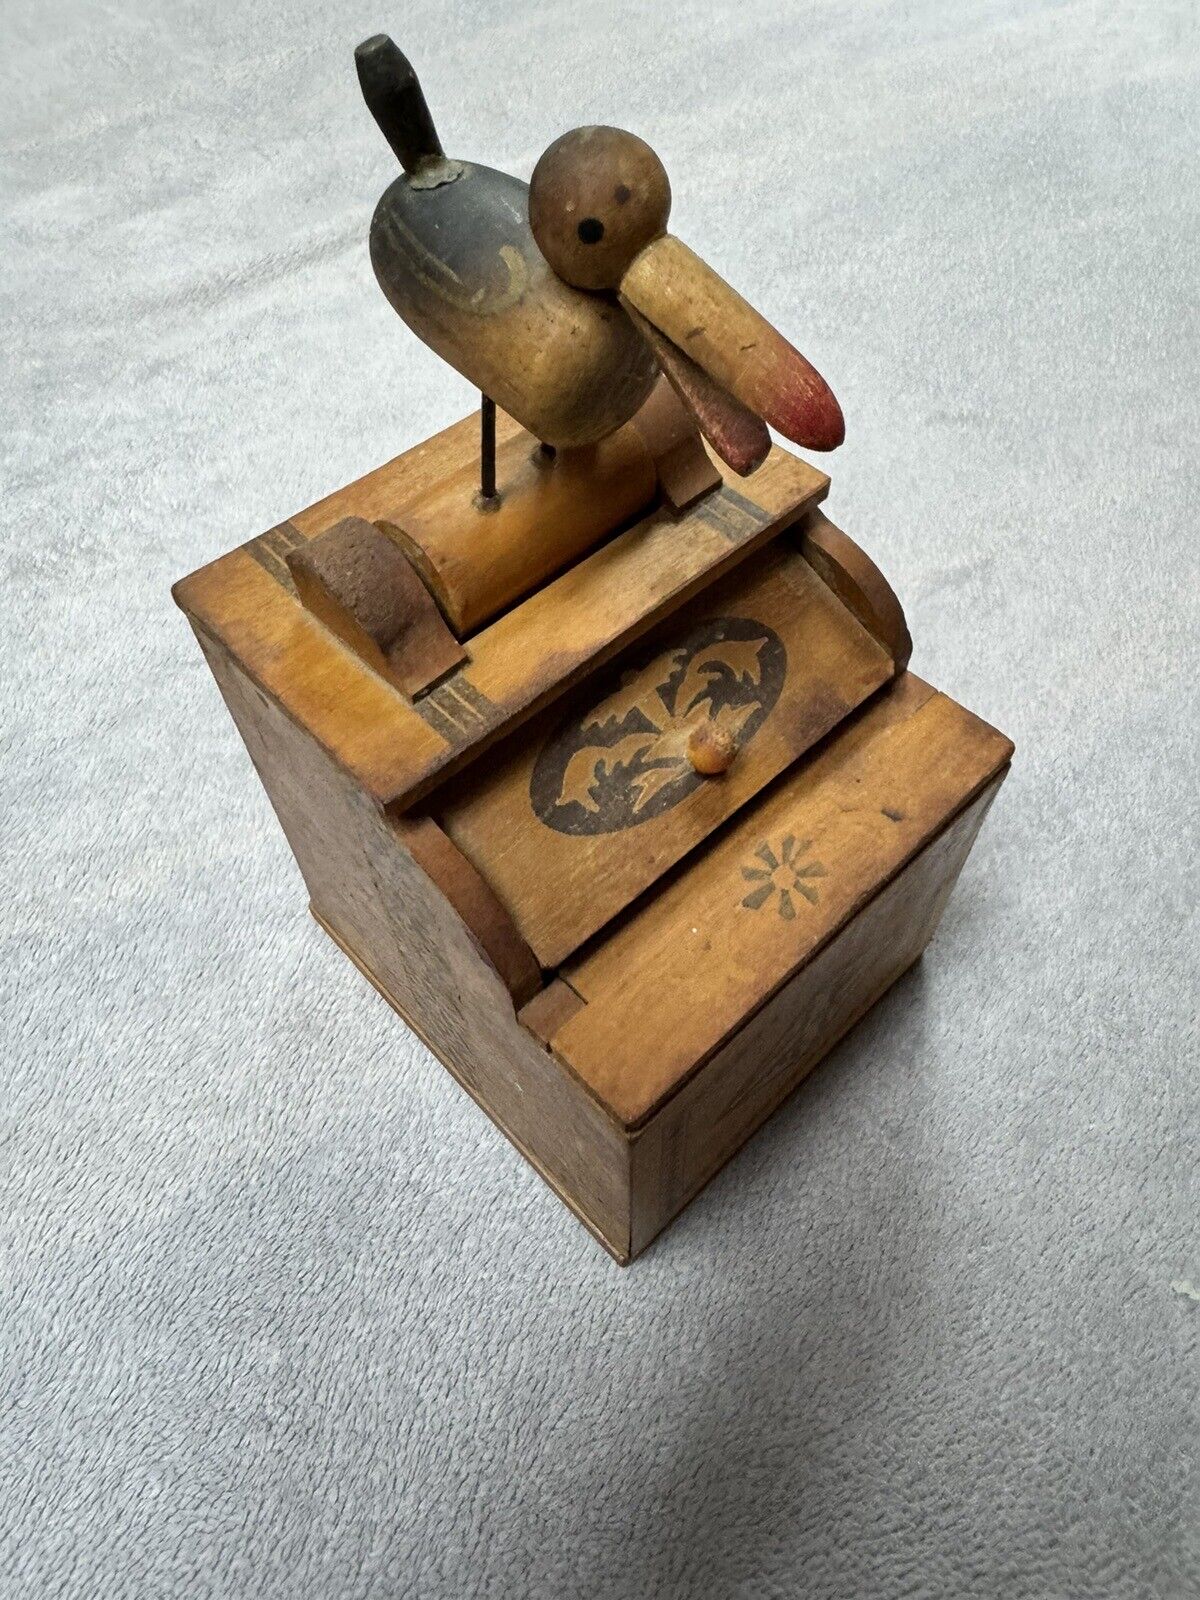 Vintage Antique 1960s Wooden Inlaid Cigarette Dispenser Box with Bird on Top 